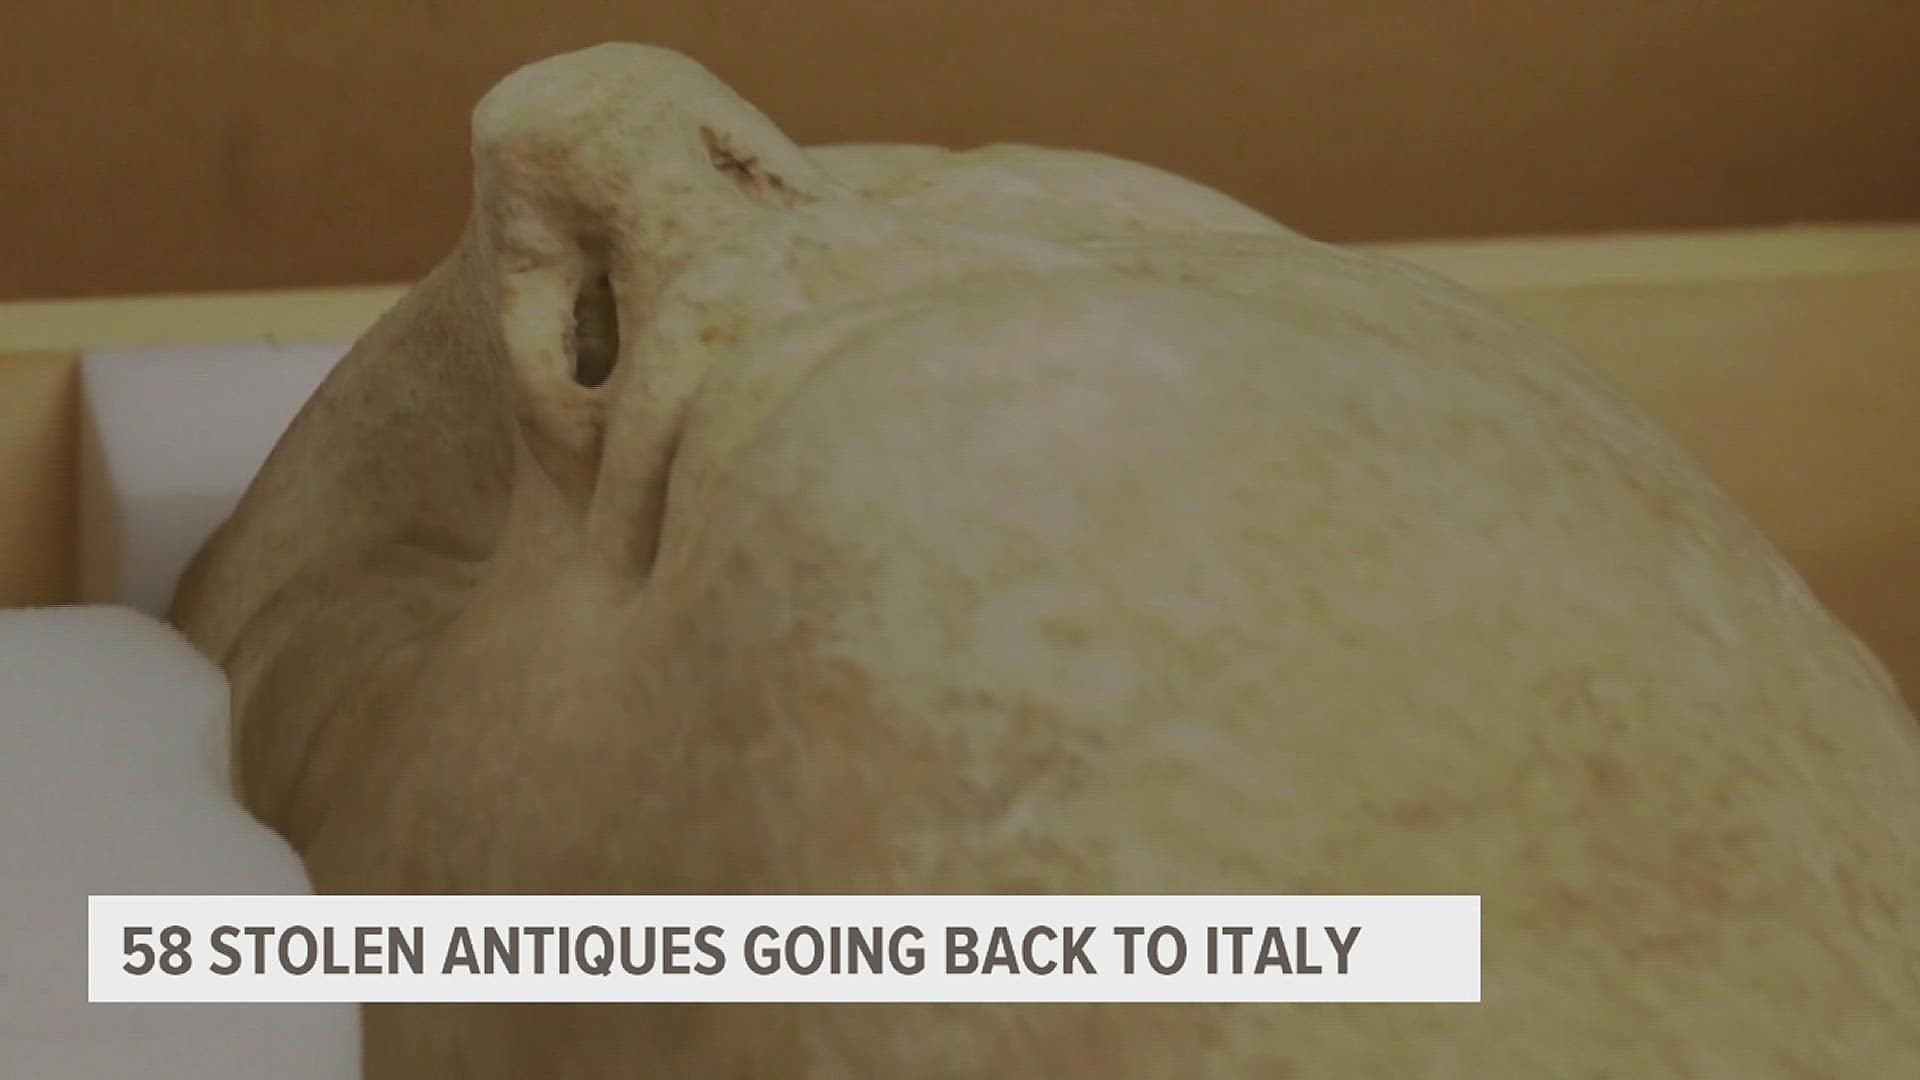 The unit has recovered more than $58 million in stolen antiques over the years.